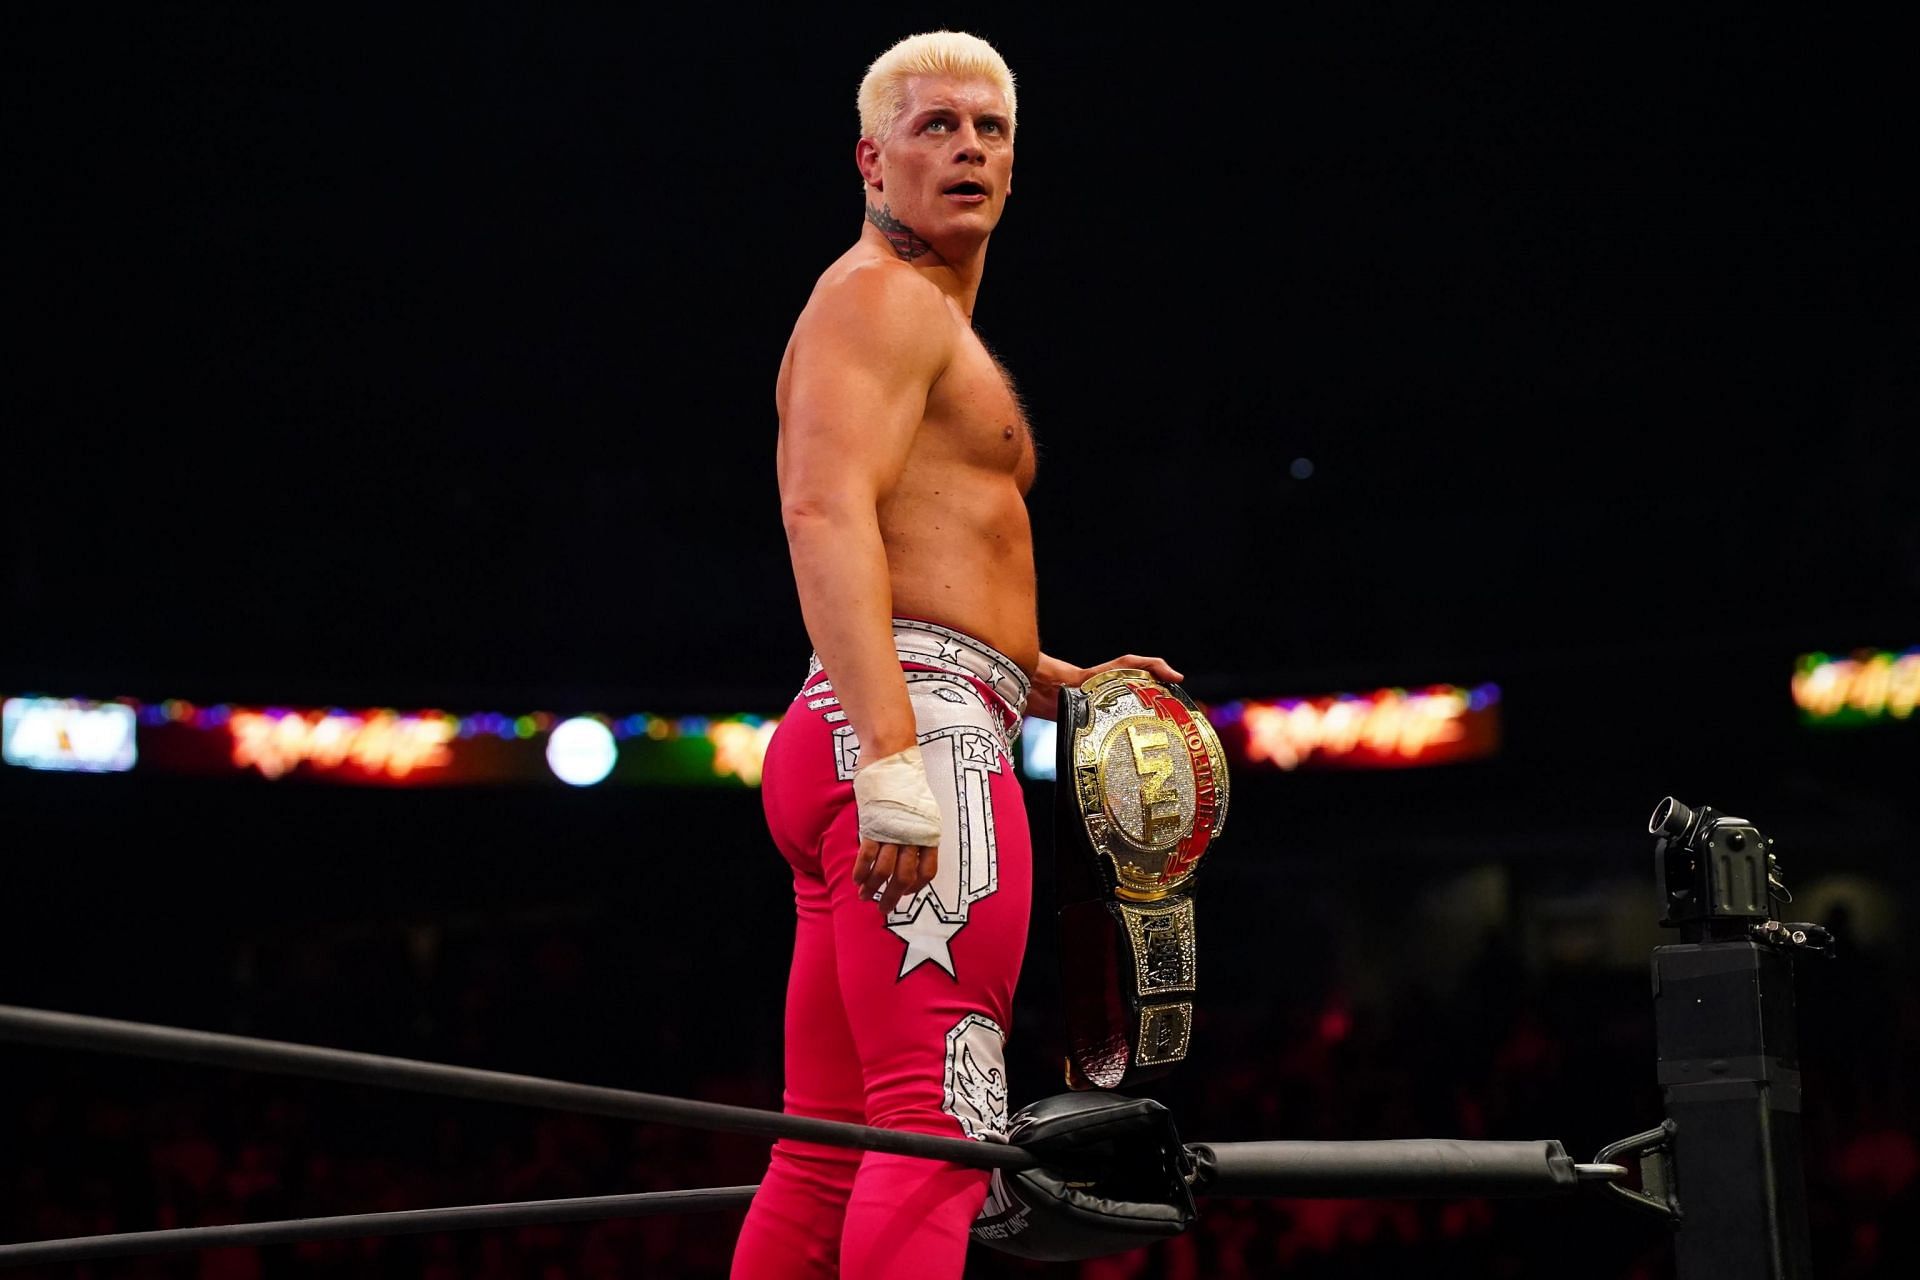 Rhodes is the first two-time champion in AEW history.